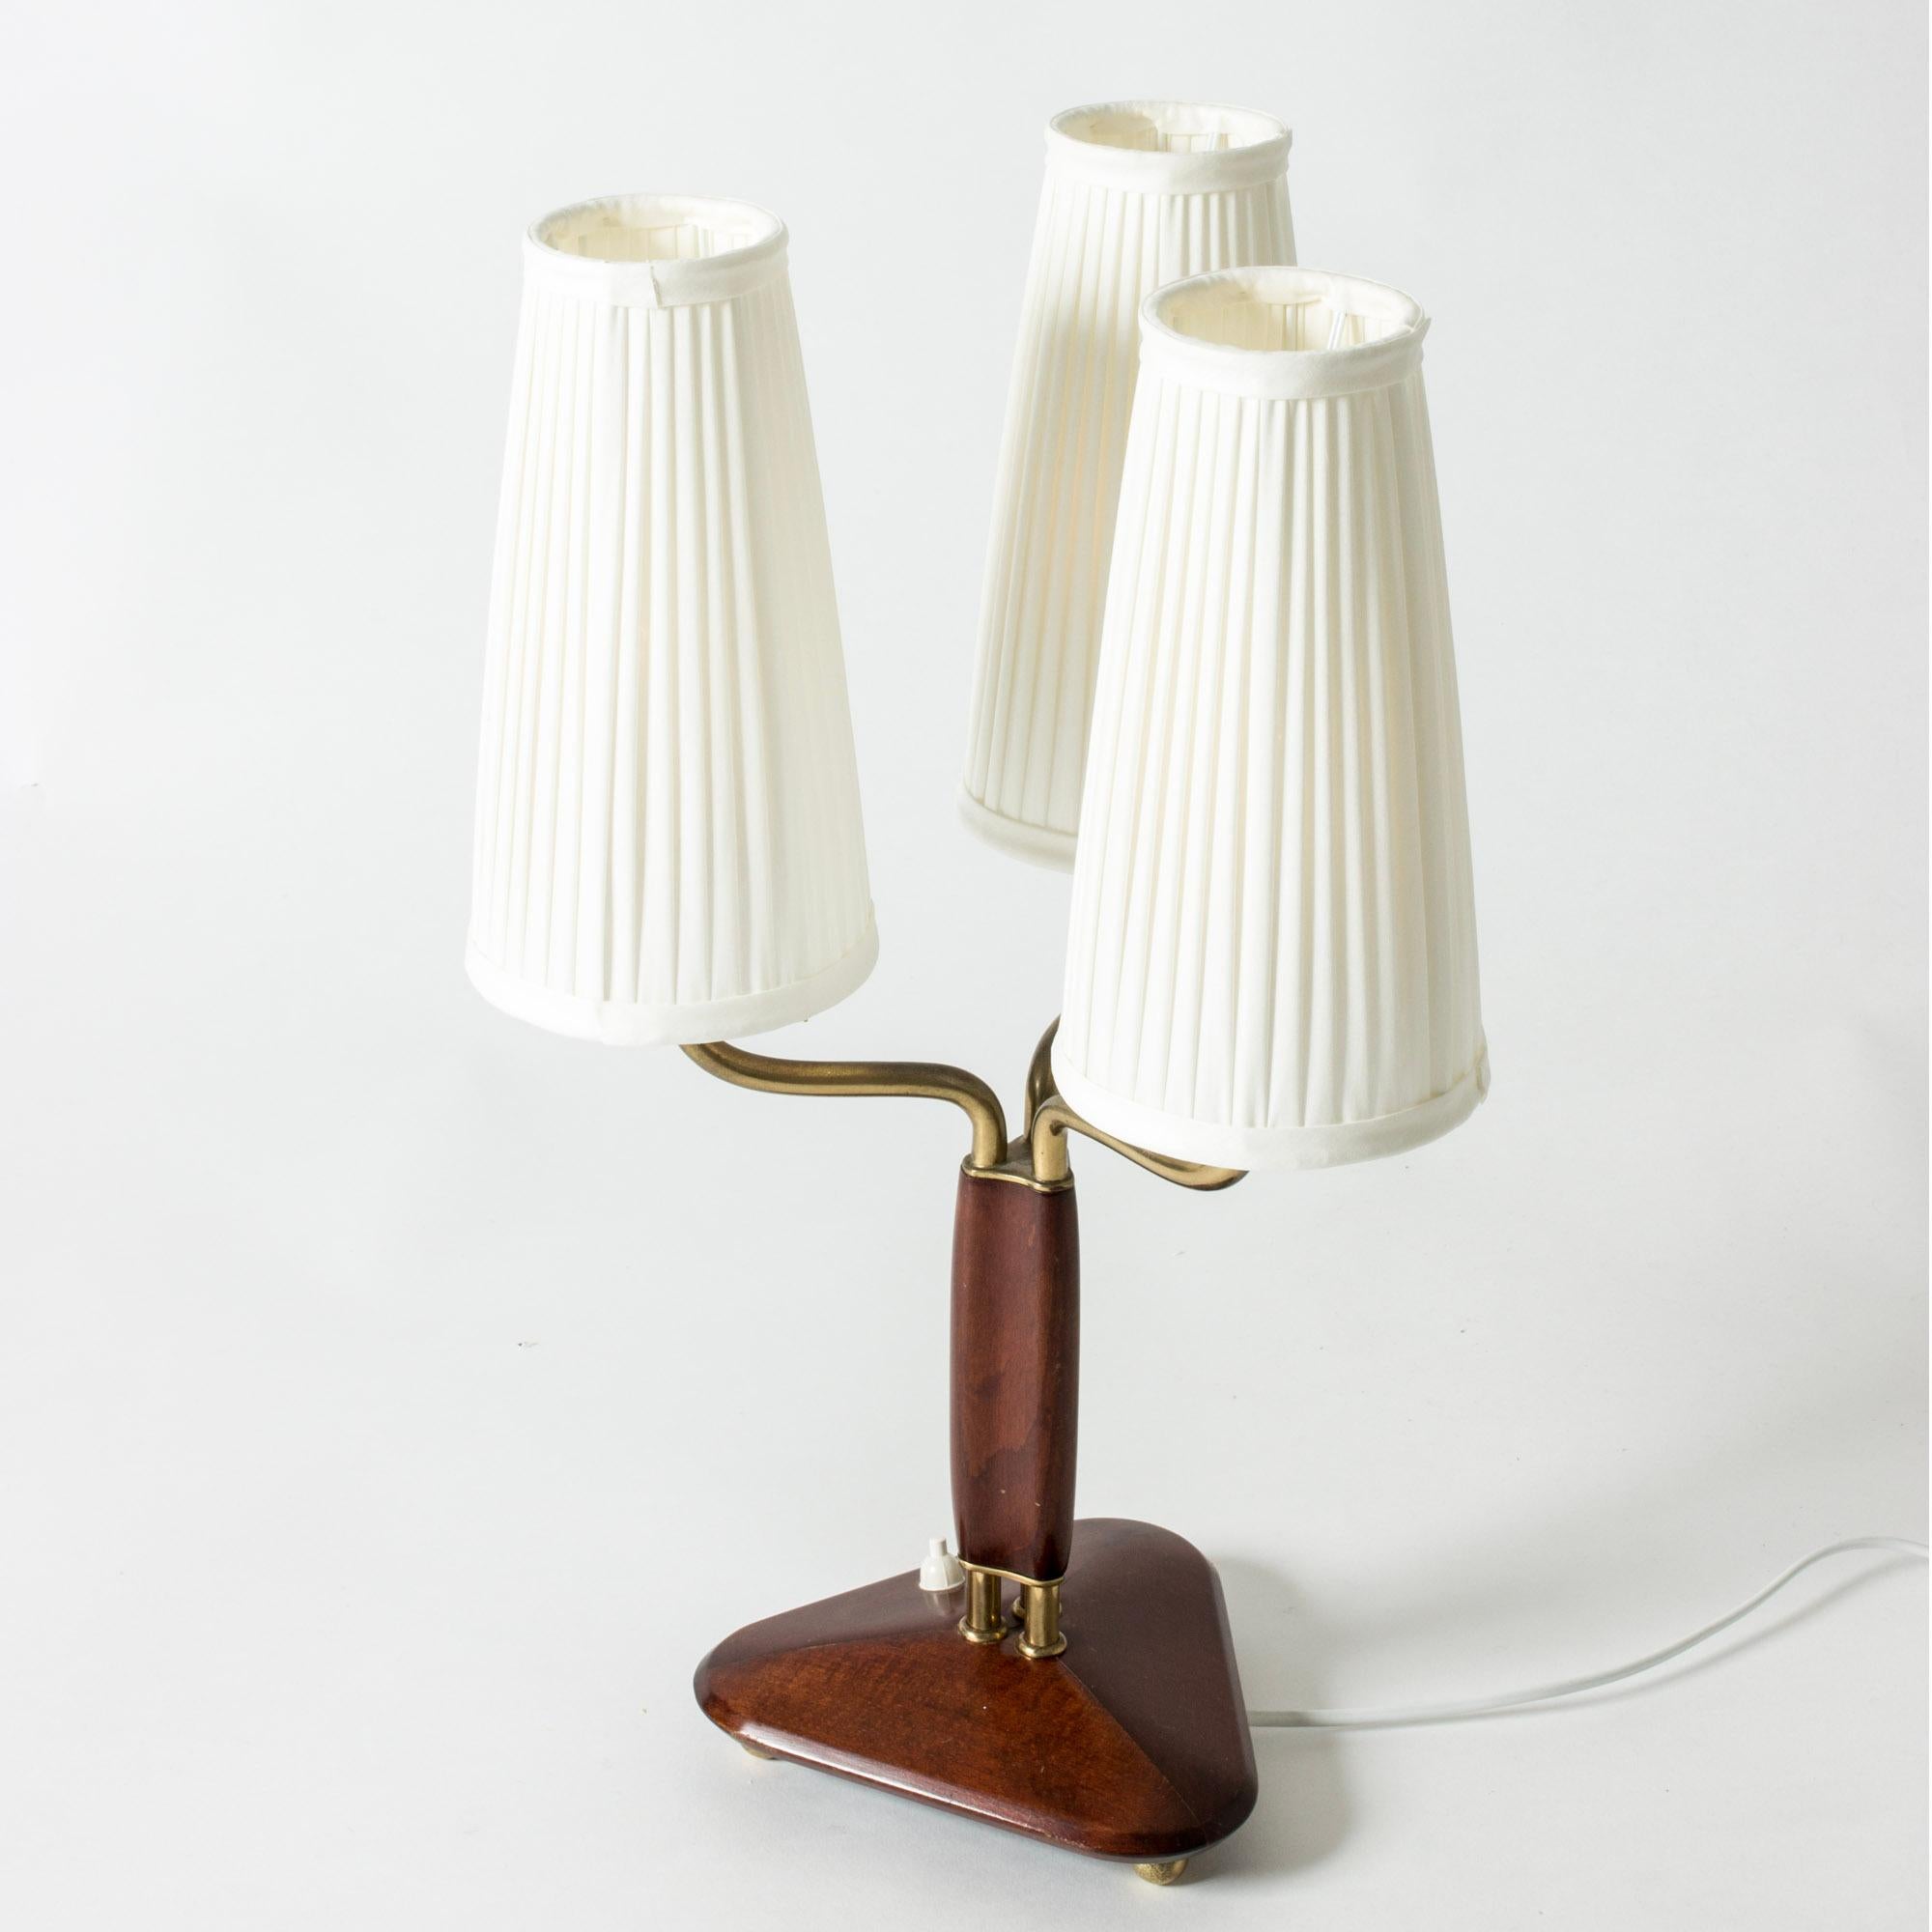 Scandinavian Modern Table Lamp by Carl-Axel Acking, Sweden, 1940s For Sale 1